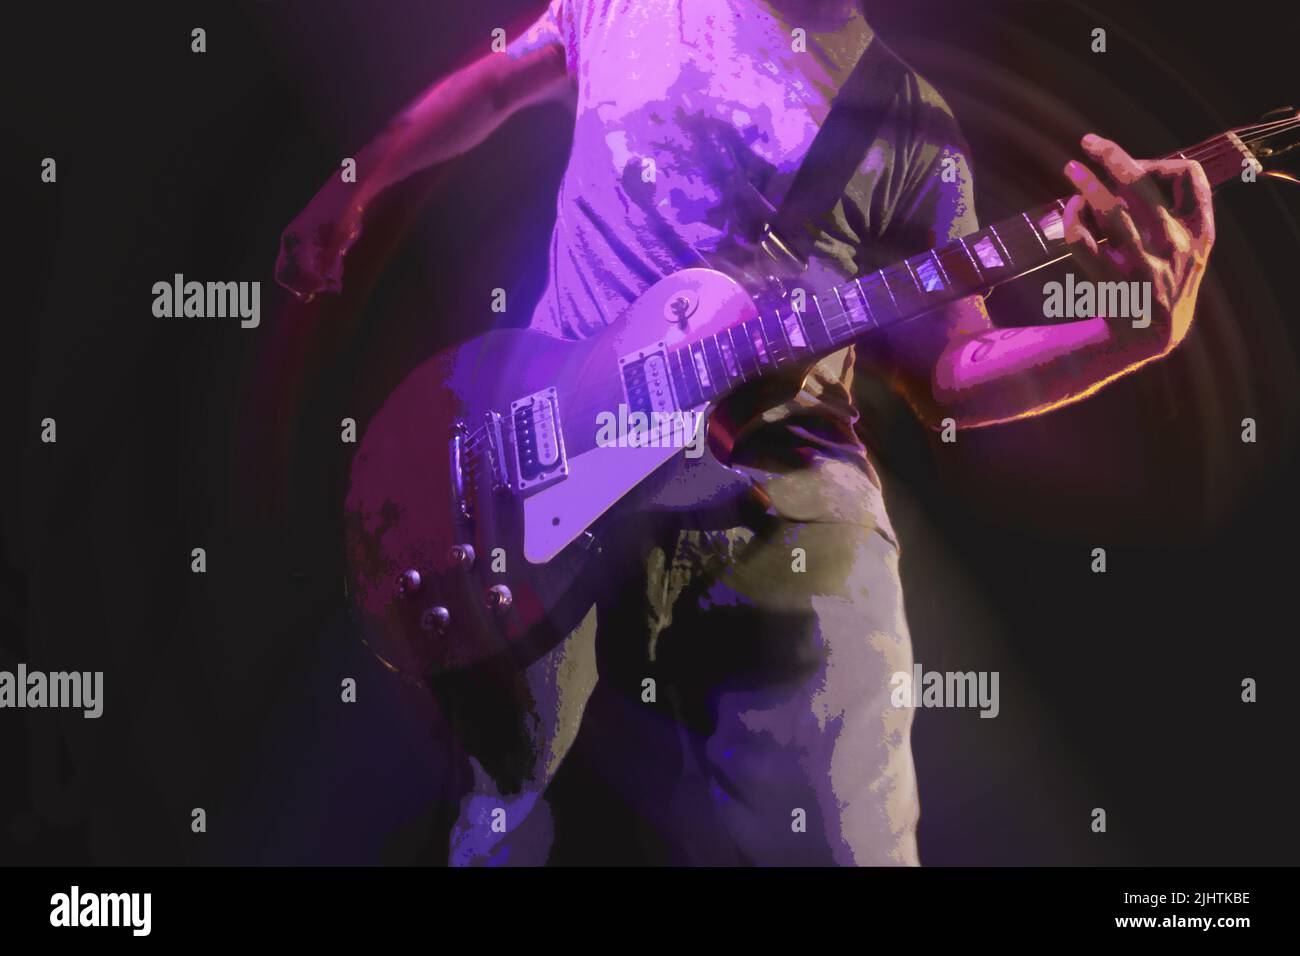 A photo illustration of an electric guitar player. Stock Photo